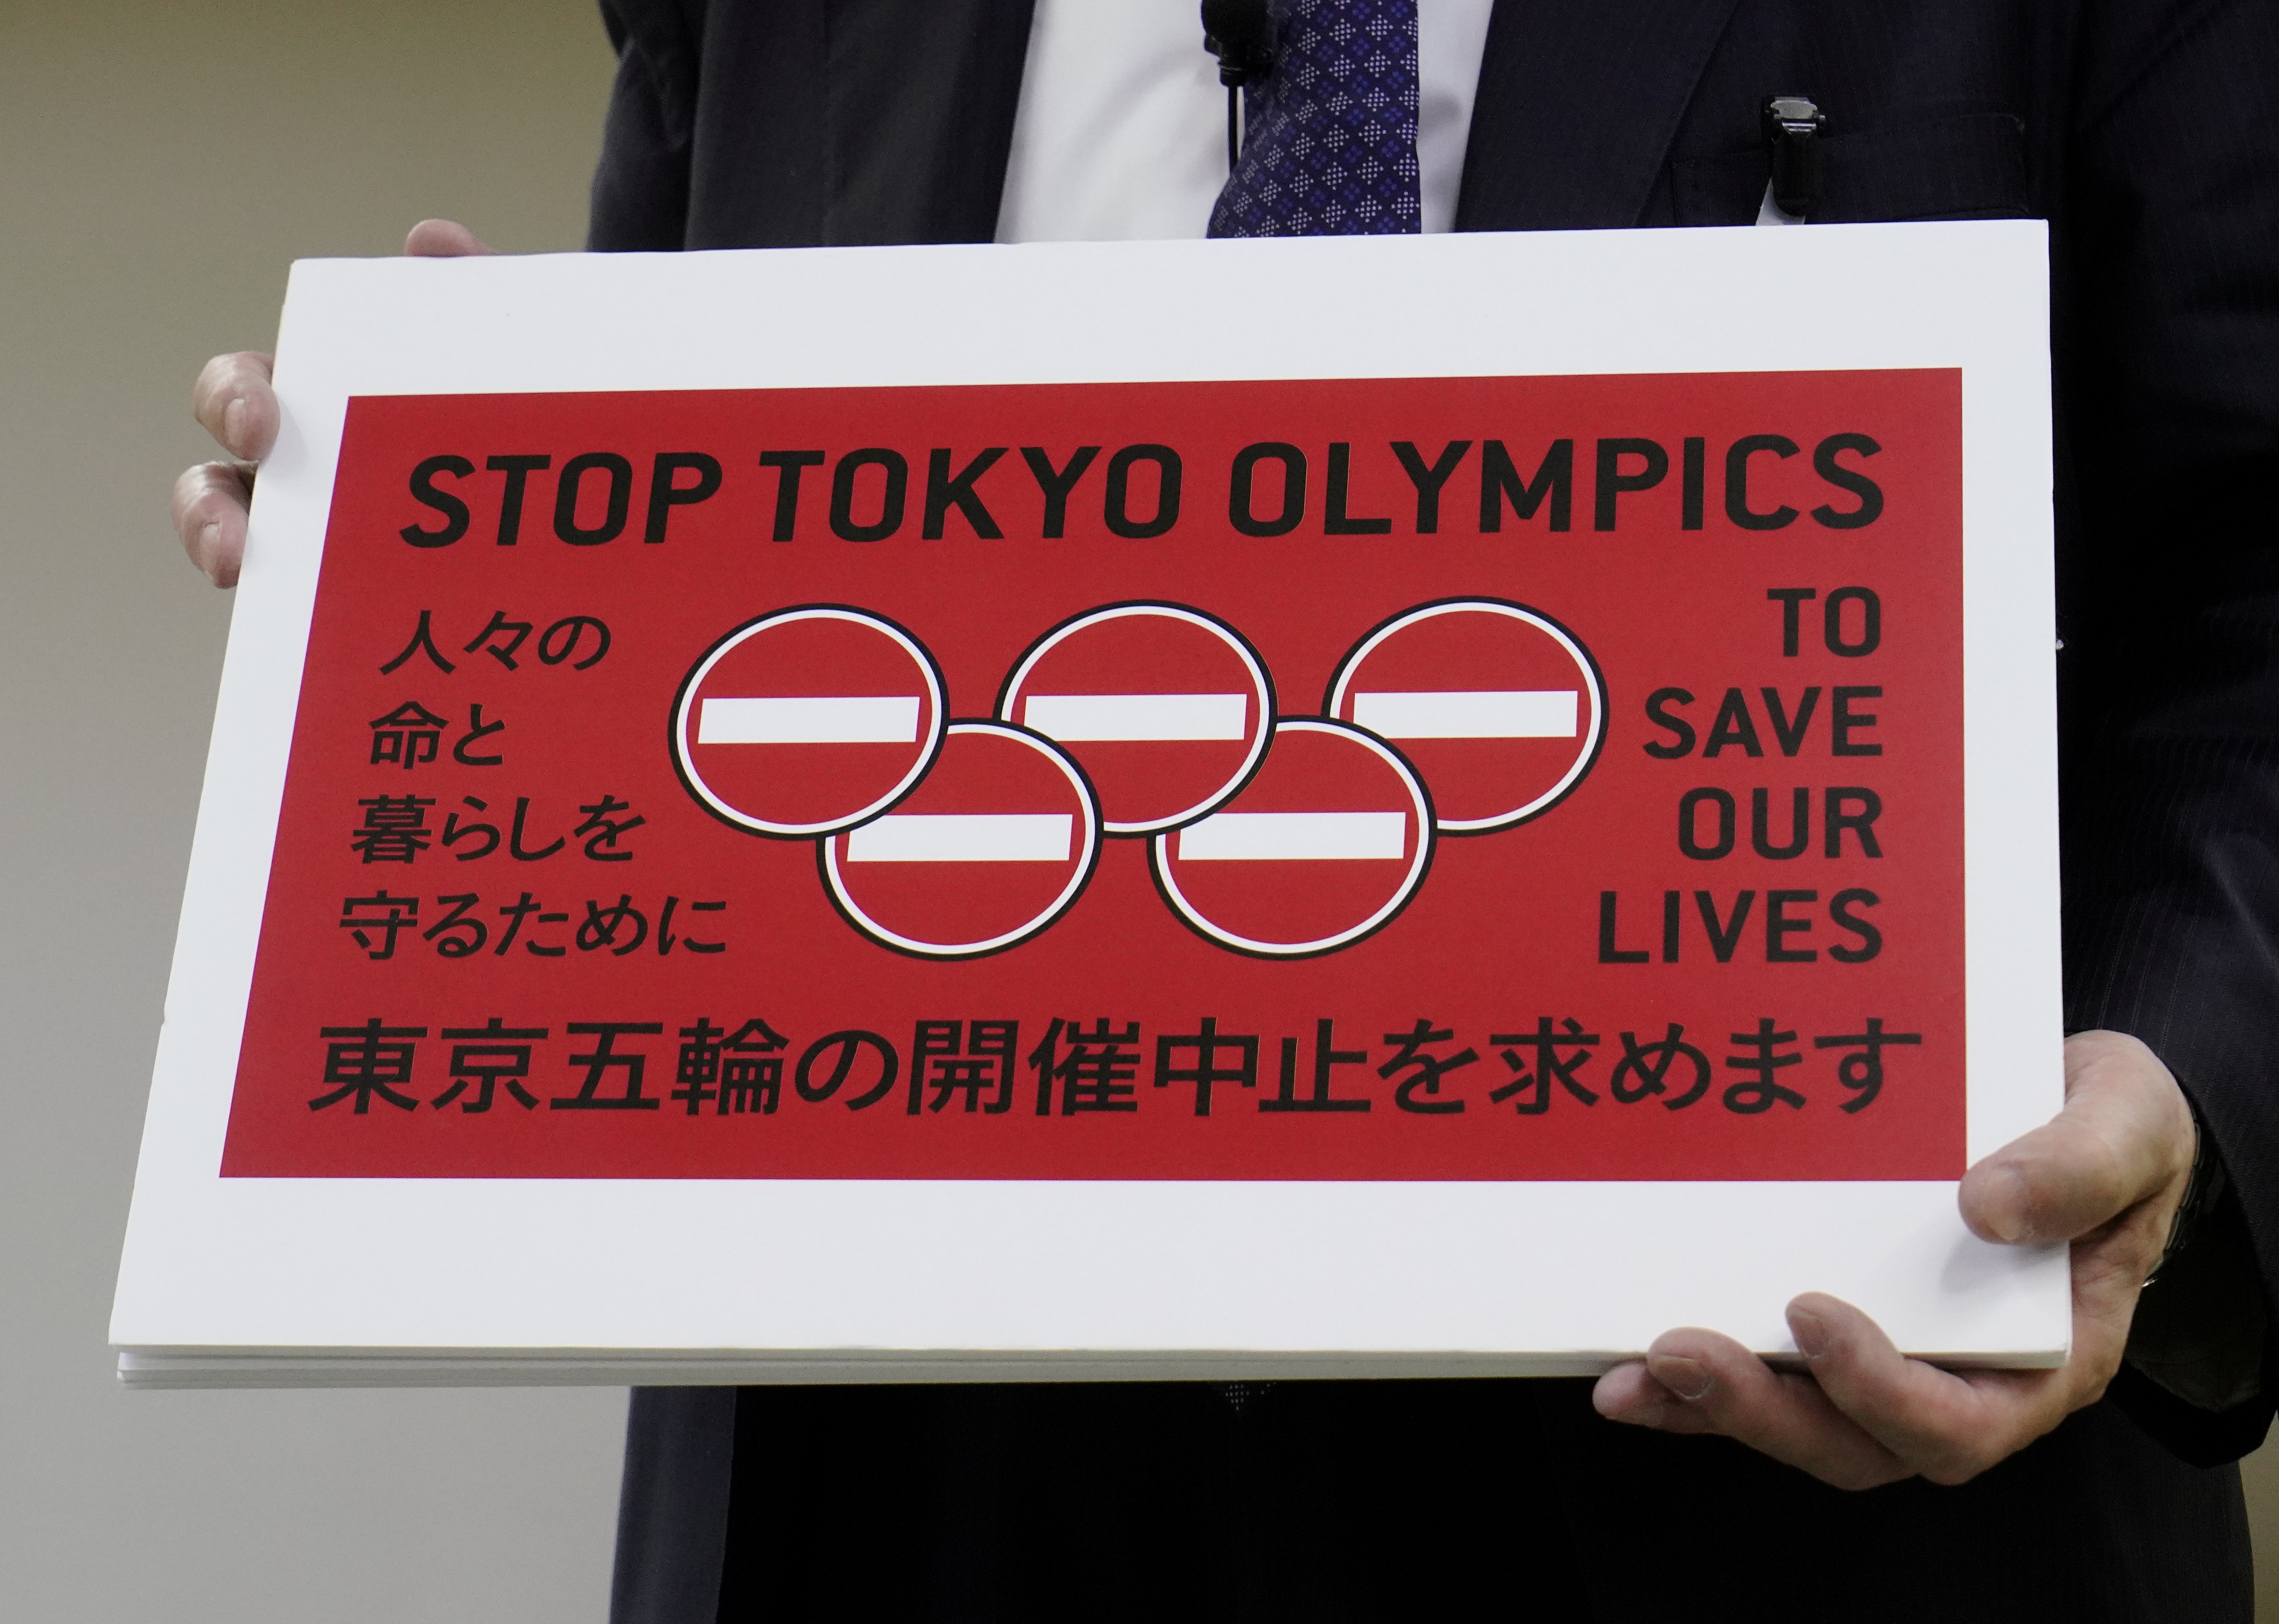 Lawyer Kenji Utsunomiya shows off a placard during a news conference after he and anti-Olympics petition organizer to submit a petition calling for the Tokyo 2020 Olympics to be cancelled in Tokyo